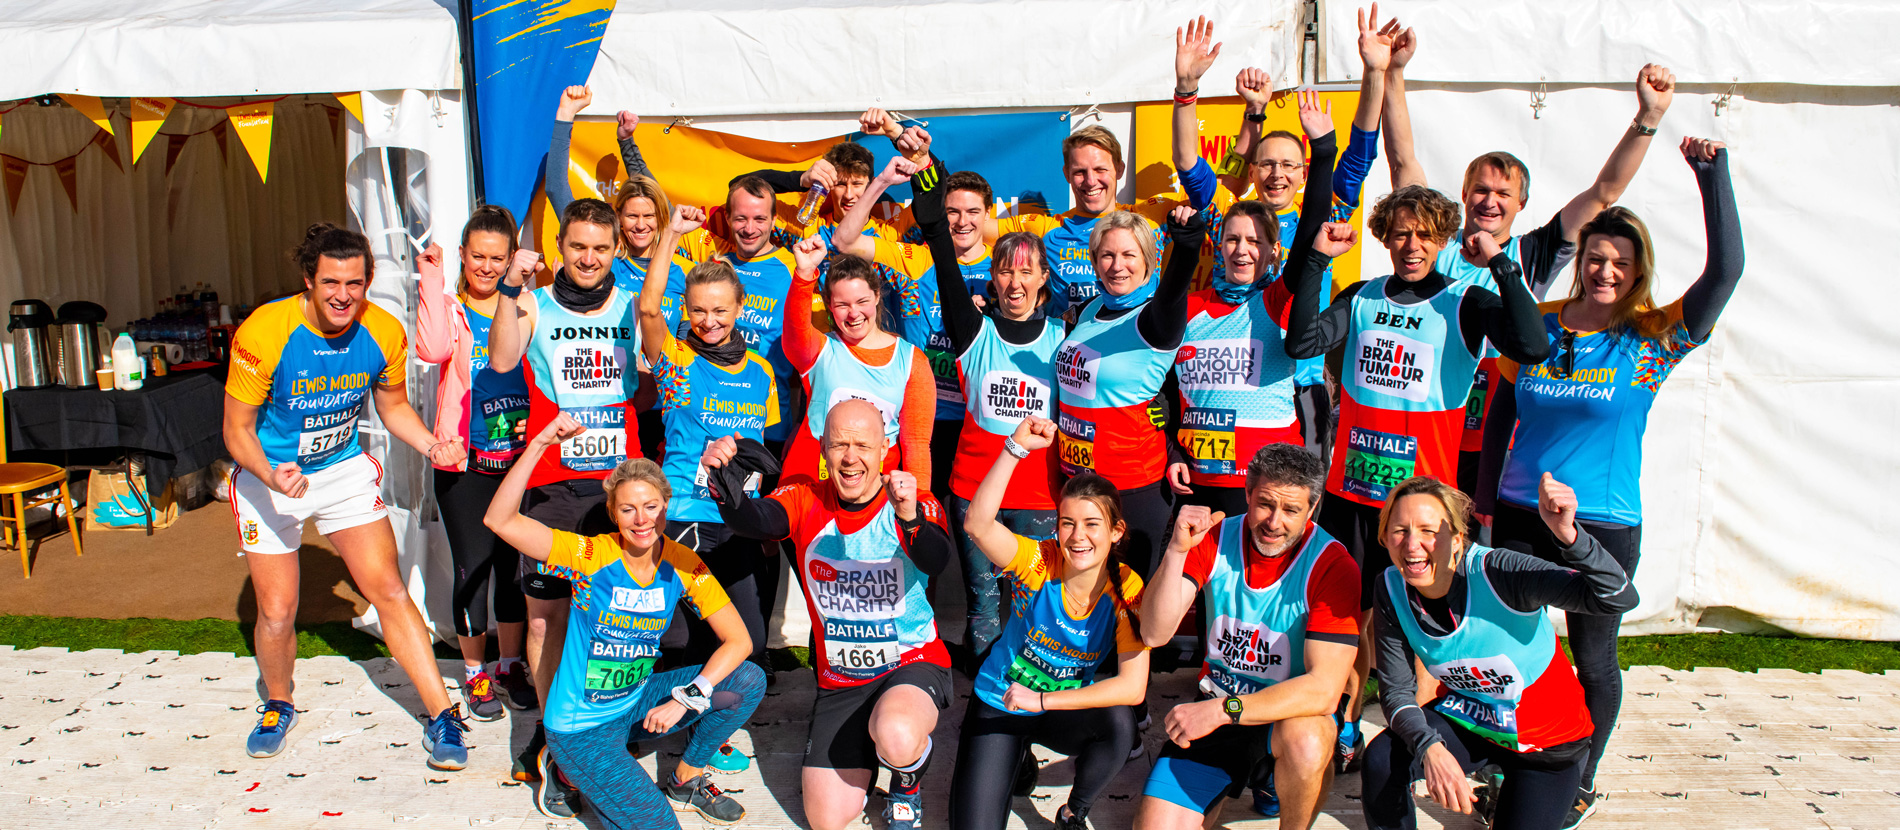 The Lewis Moody Foundation team celebrate after they beat the Bath Half Marathon 2019